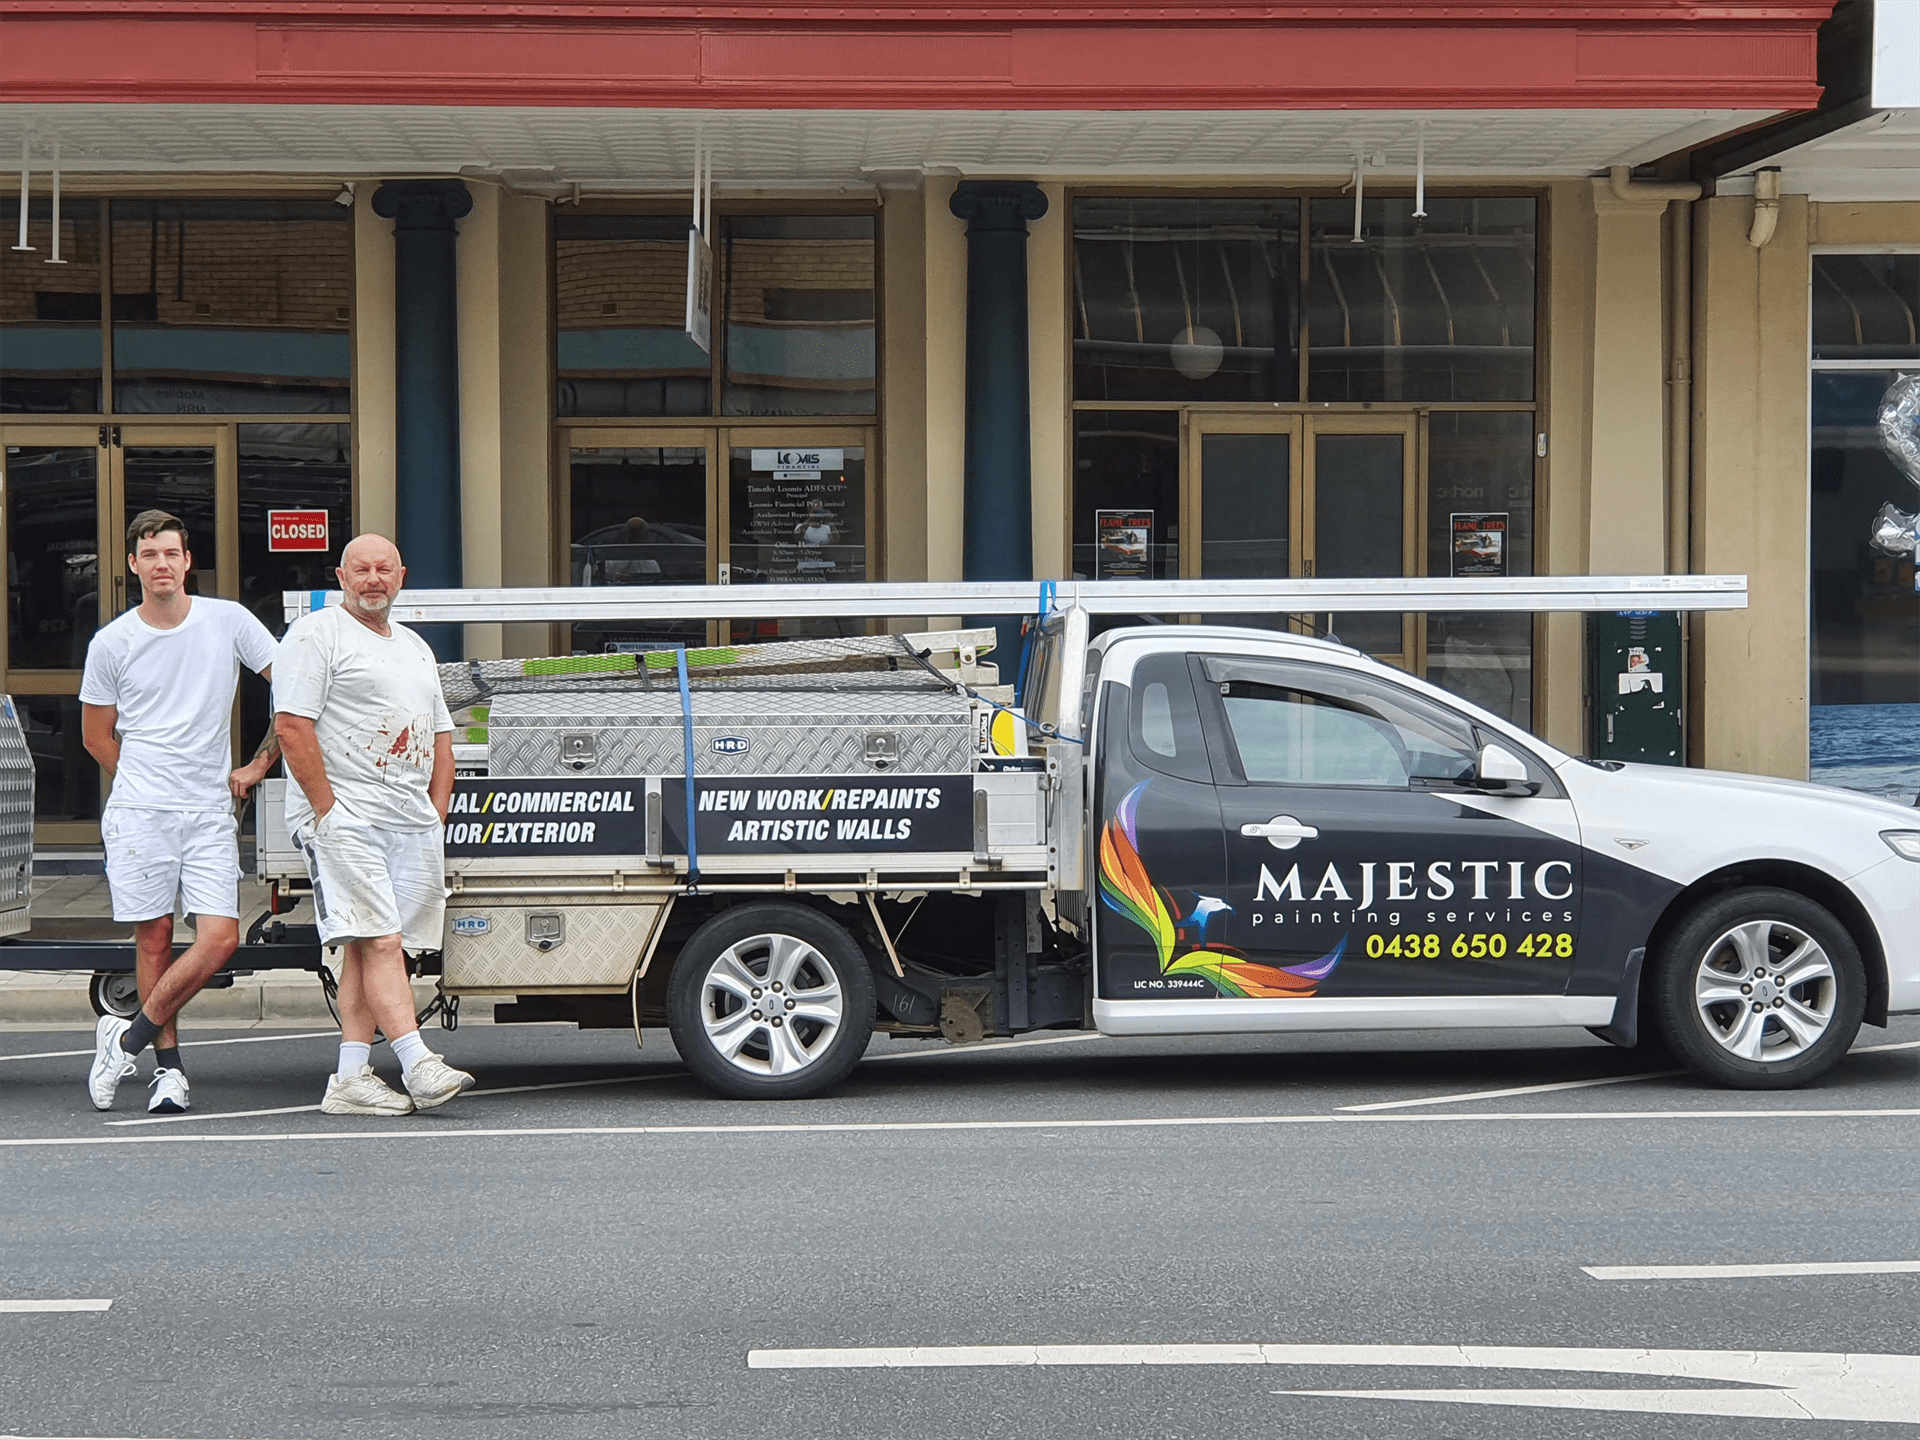 Experienced painting contractors port macquarie -  Majestic Painting Service in Port Macquarie, NSW